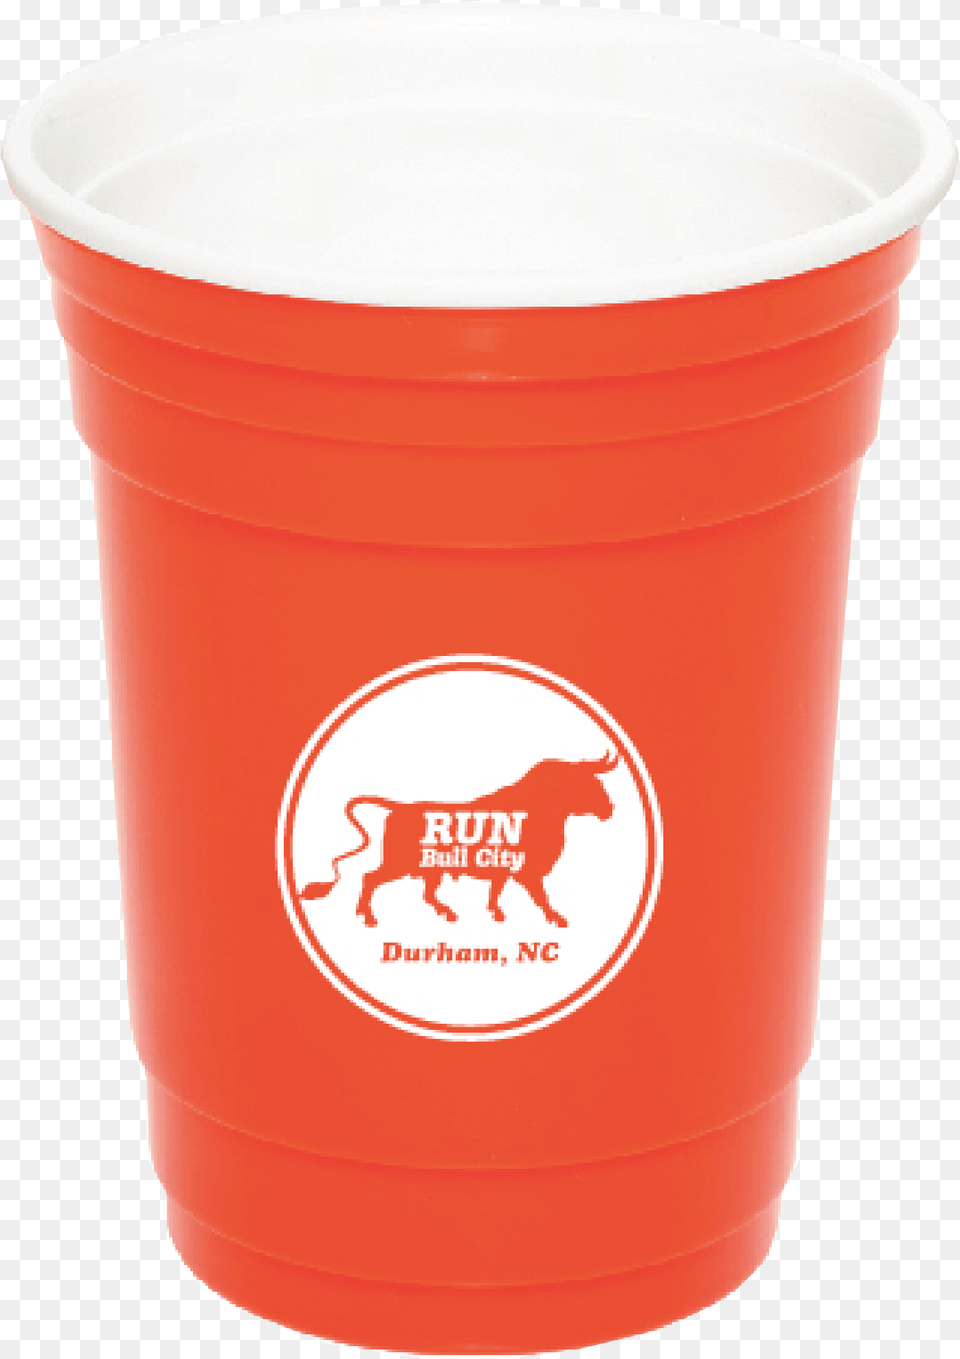 Run Bull City Party Cup Phuket Island, Bottle, Shaker Free Transparent Png